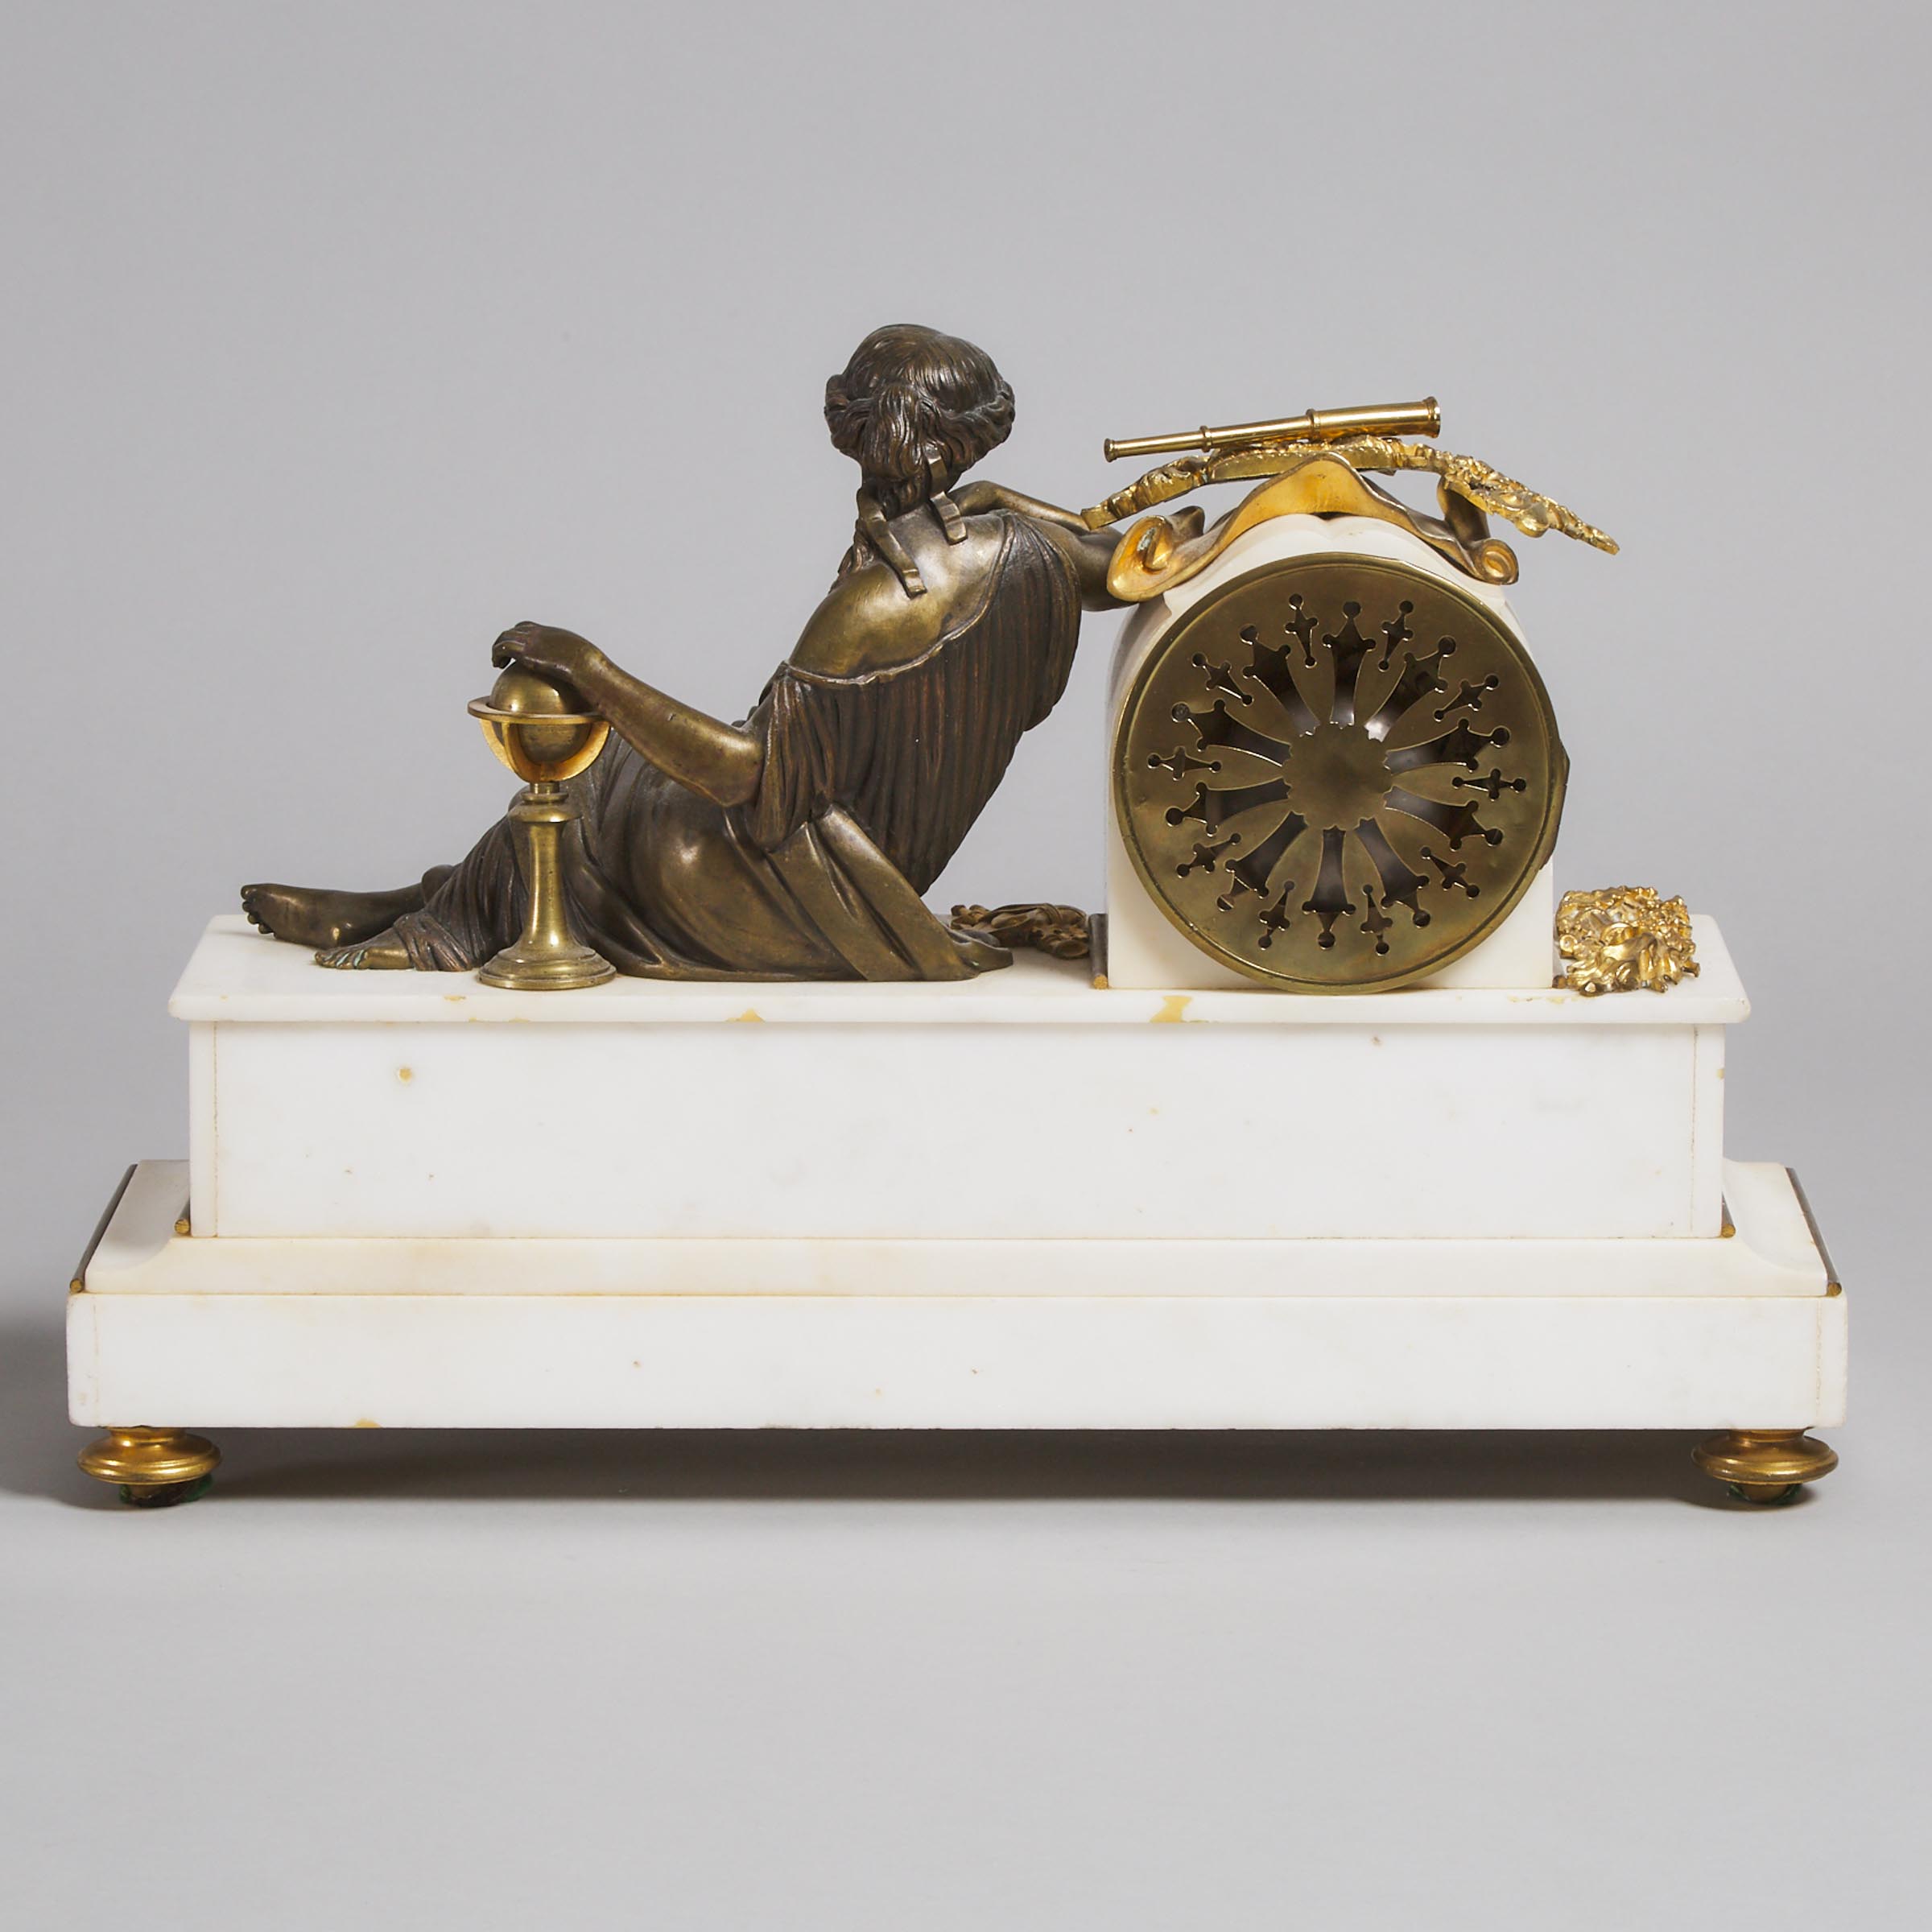 French Neoclassical Gilt and Patinated Bronze Mounted White Marble Figural Mantel Clock, c.1860